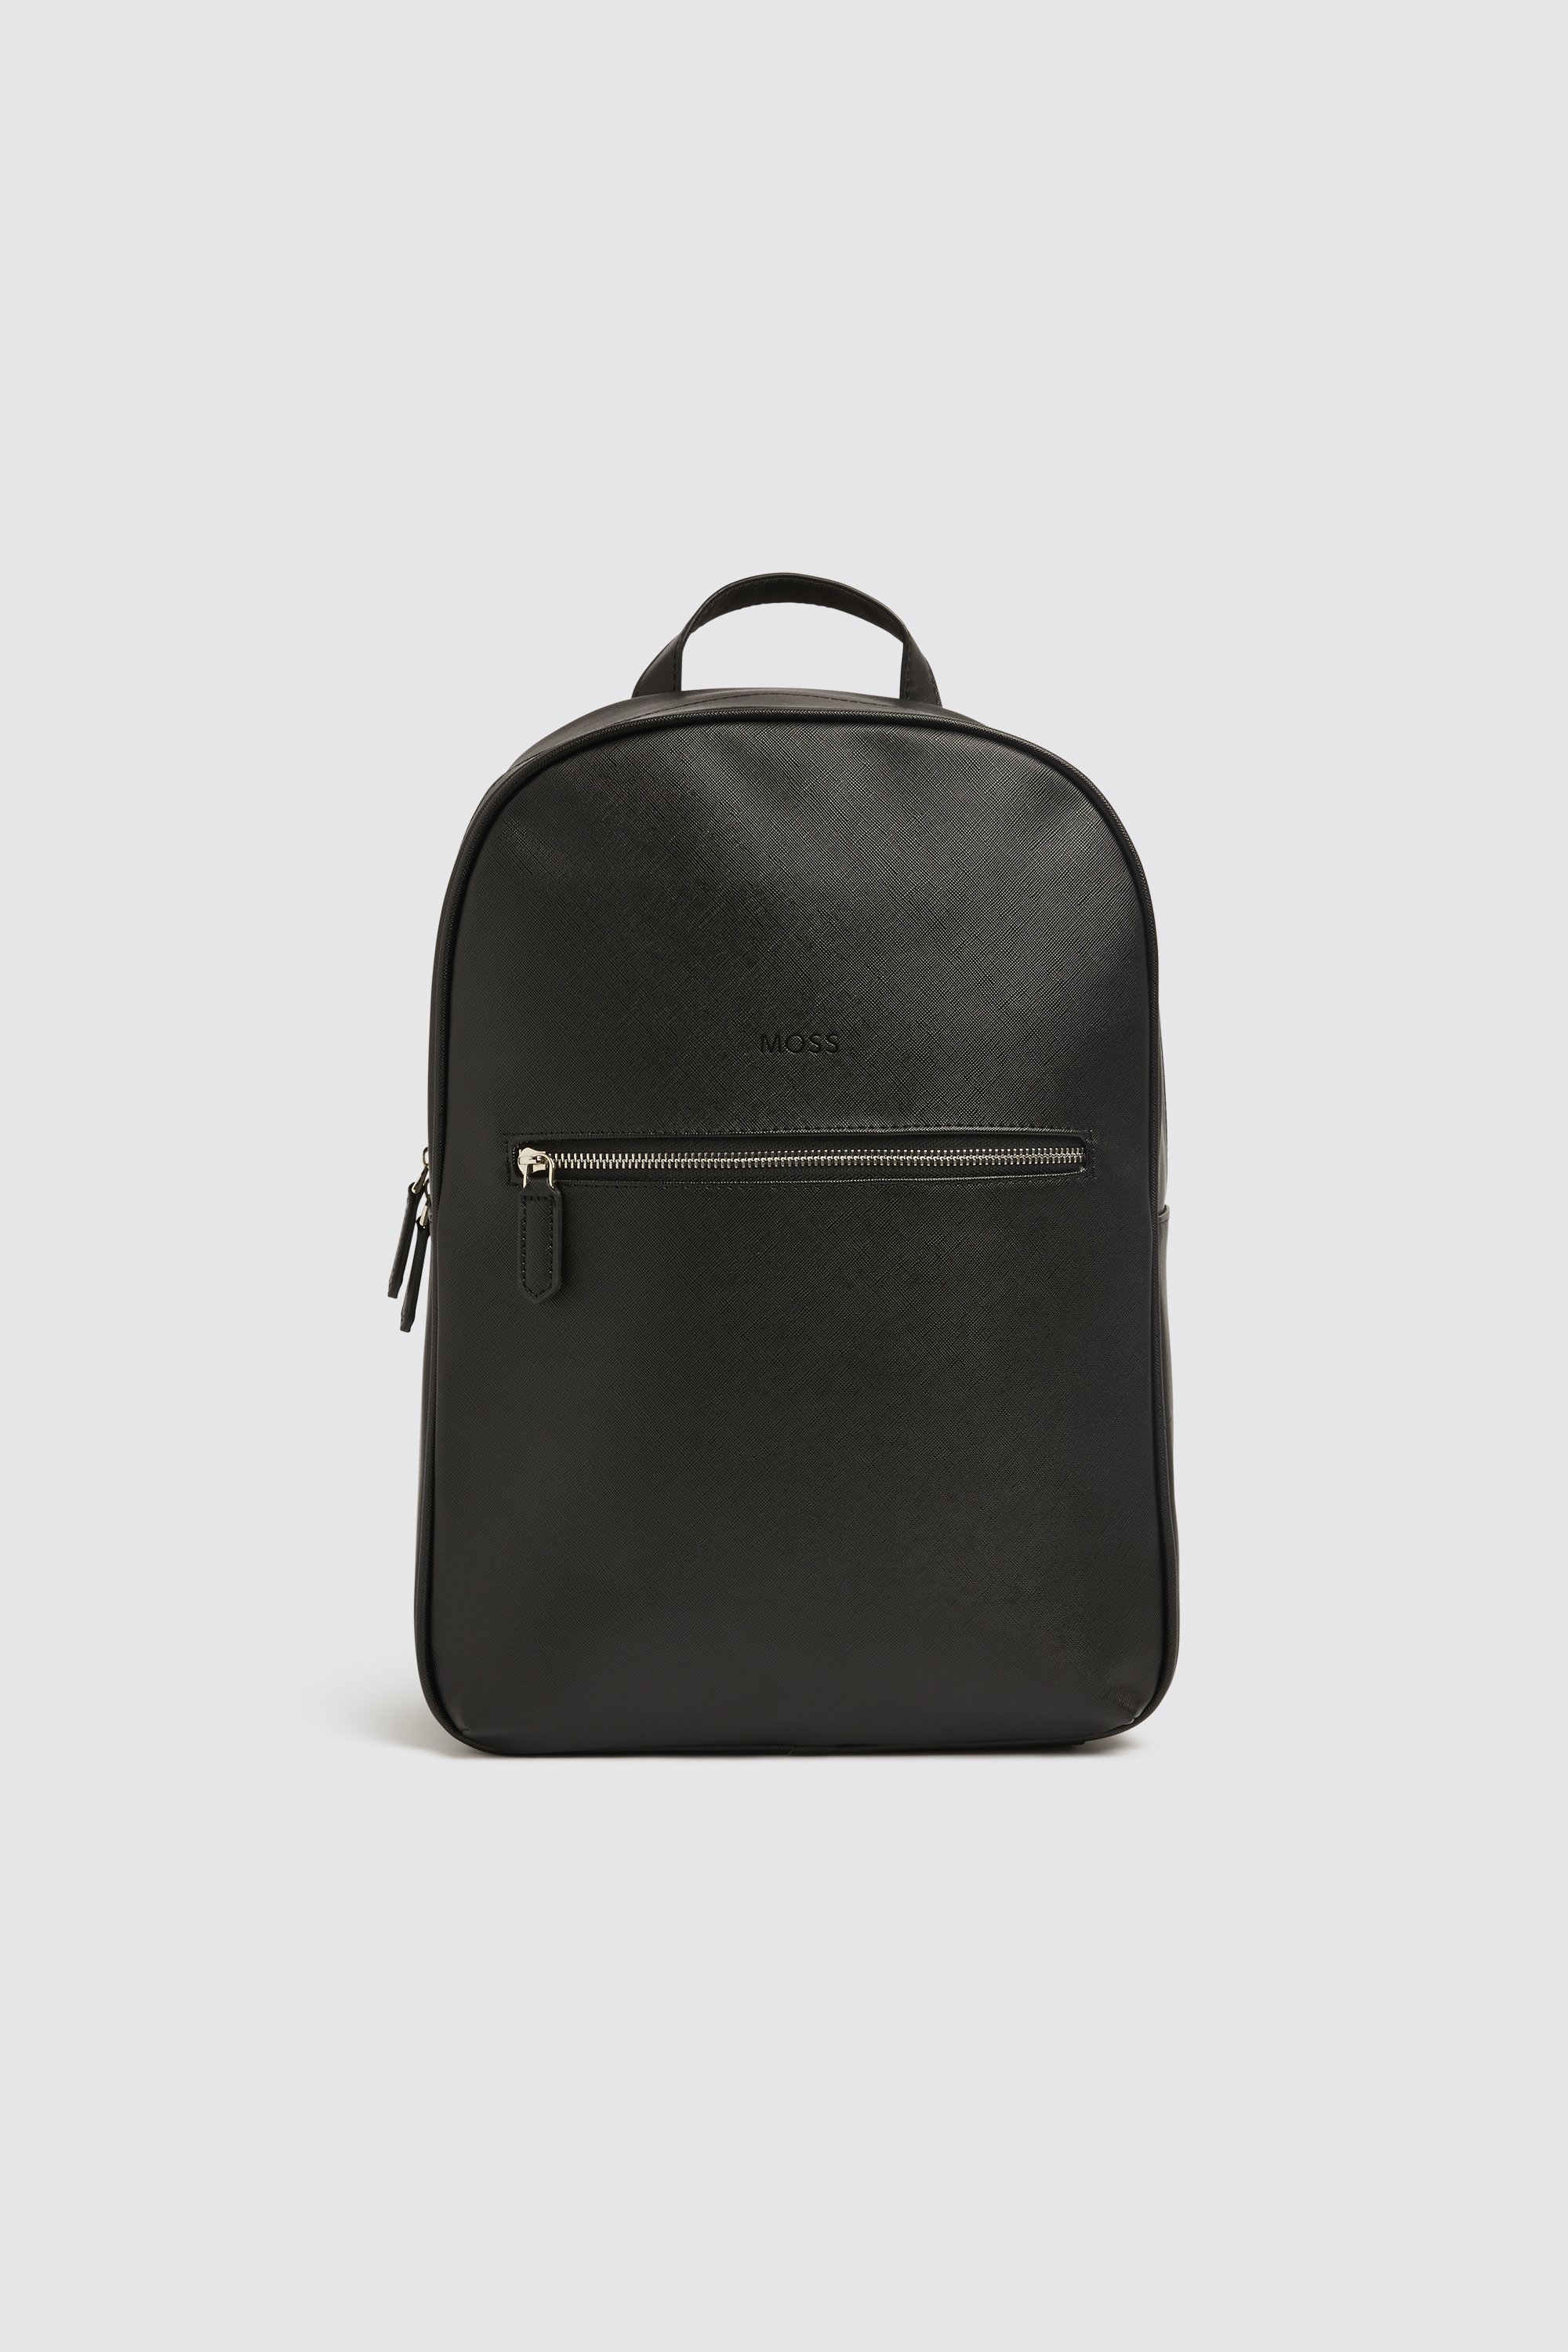 Moss Black Saffiano Backpack | Buy Online at Moss